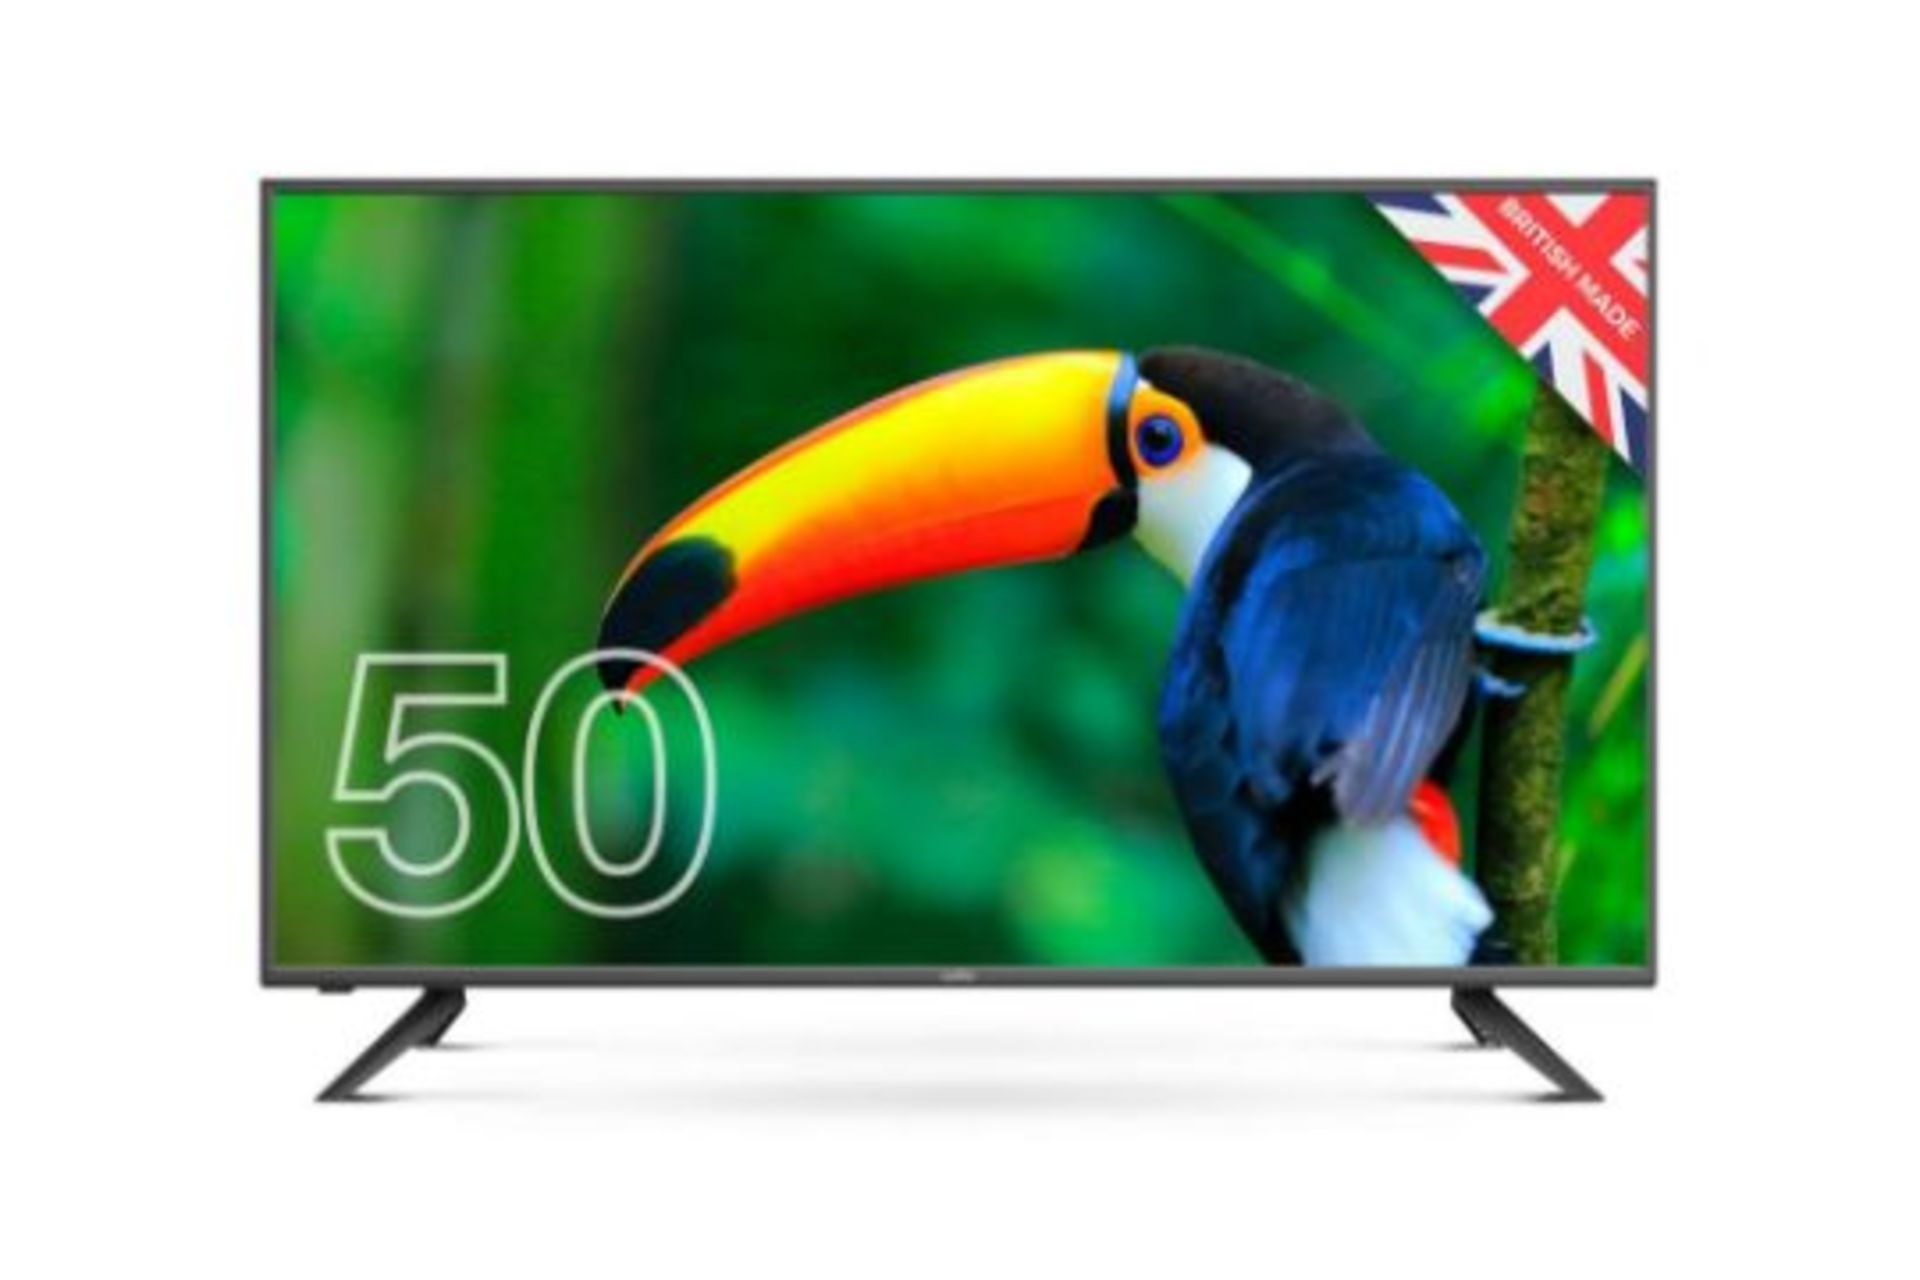 Cello C5020DVB 50 inch Full HD LED TV With Built-in Freeview T2 HD